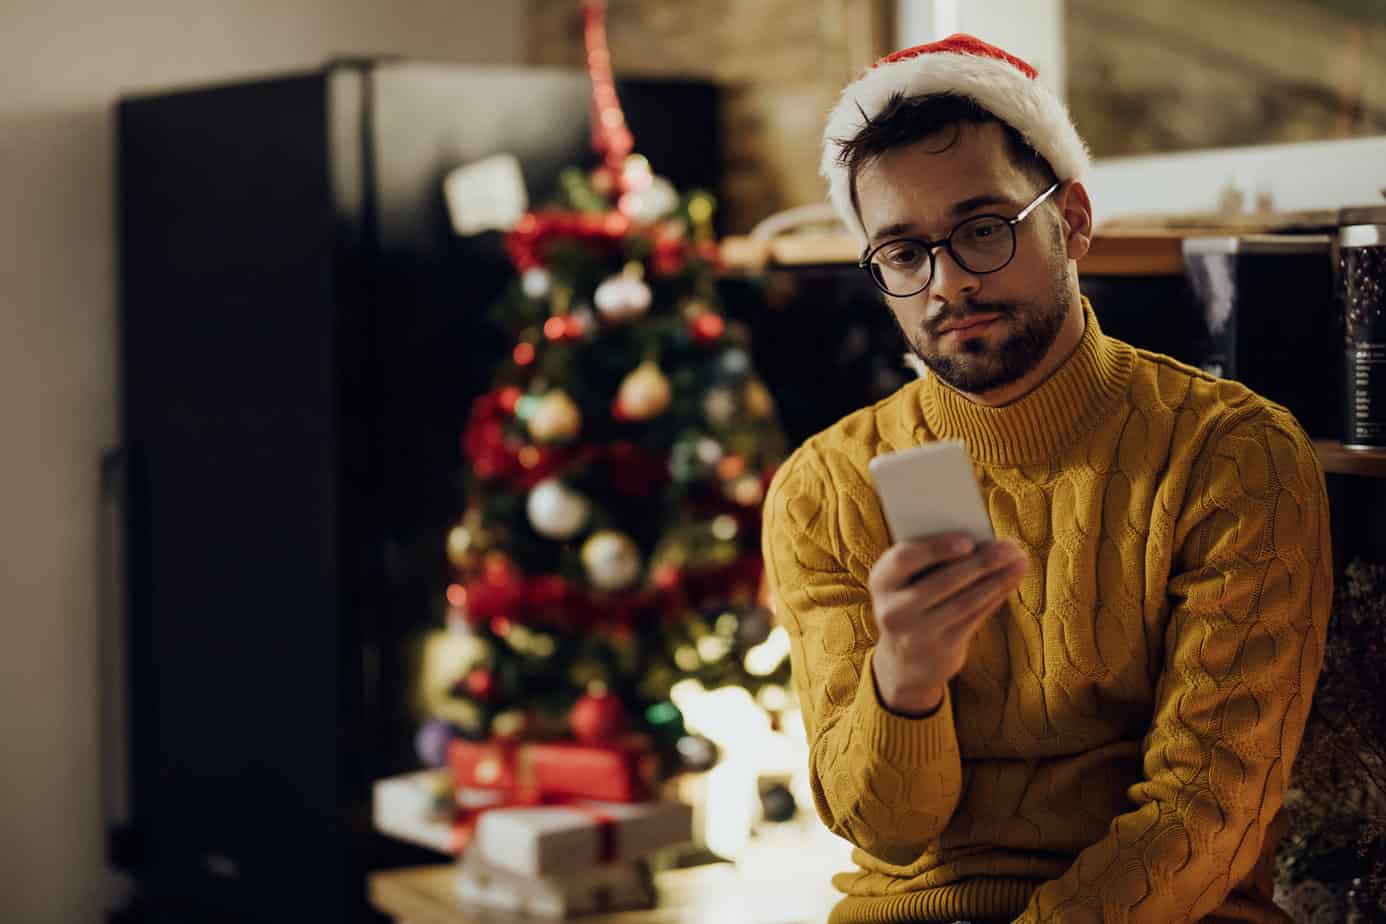 Young distraught man reading text message on cell phone while being alone at home on Christmas.